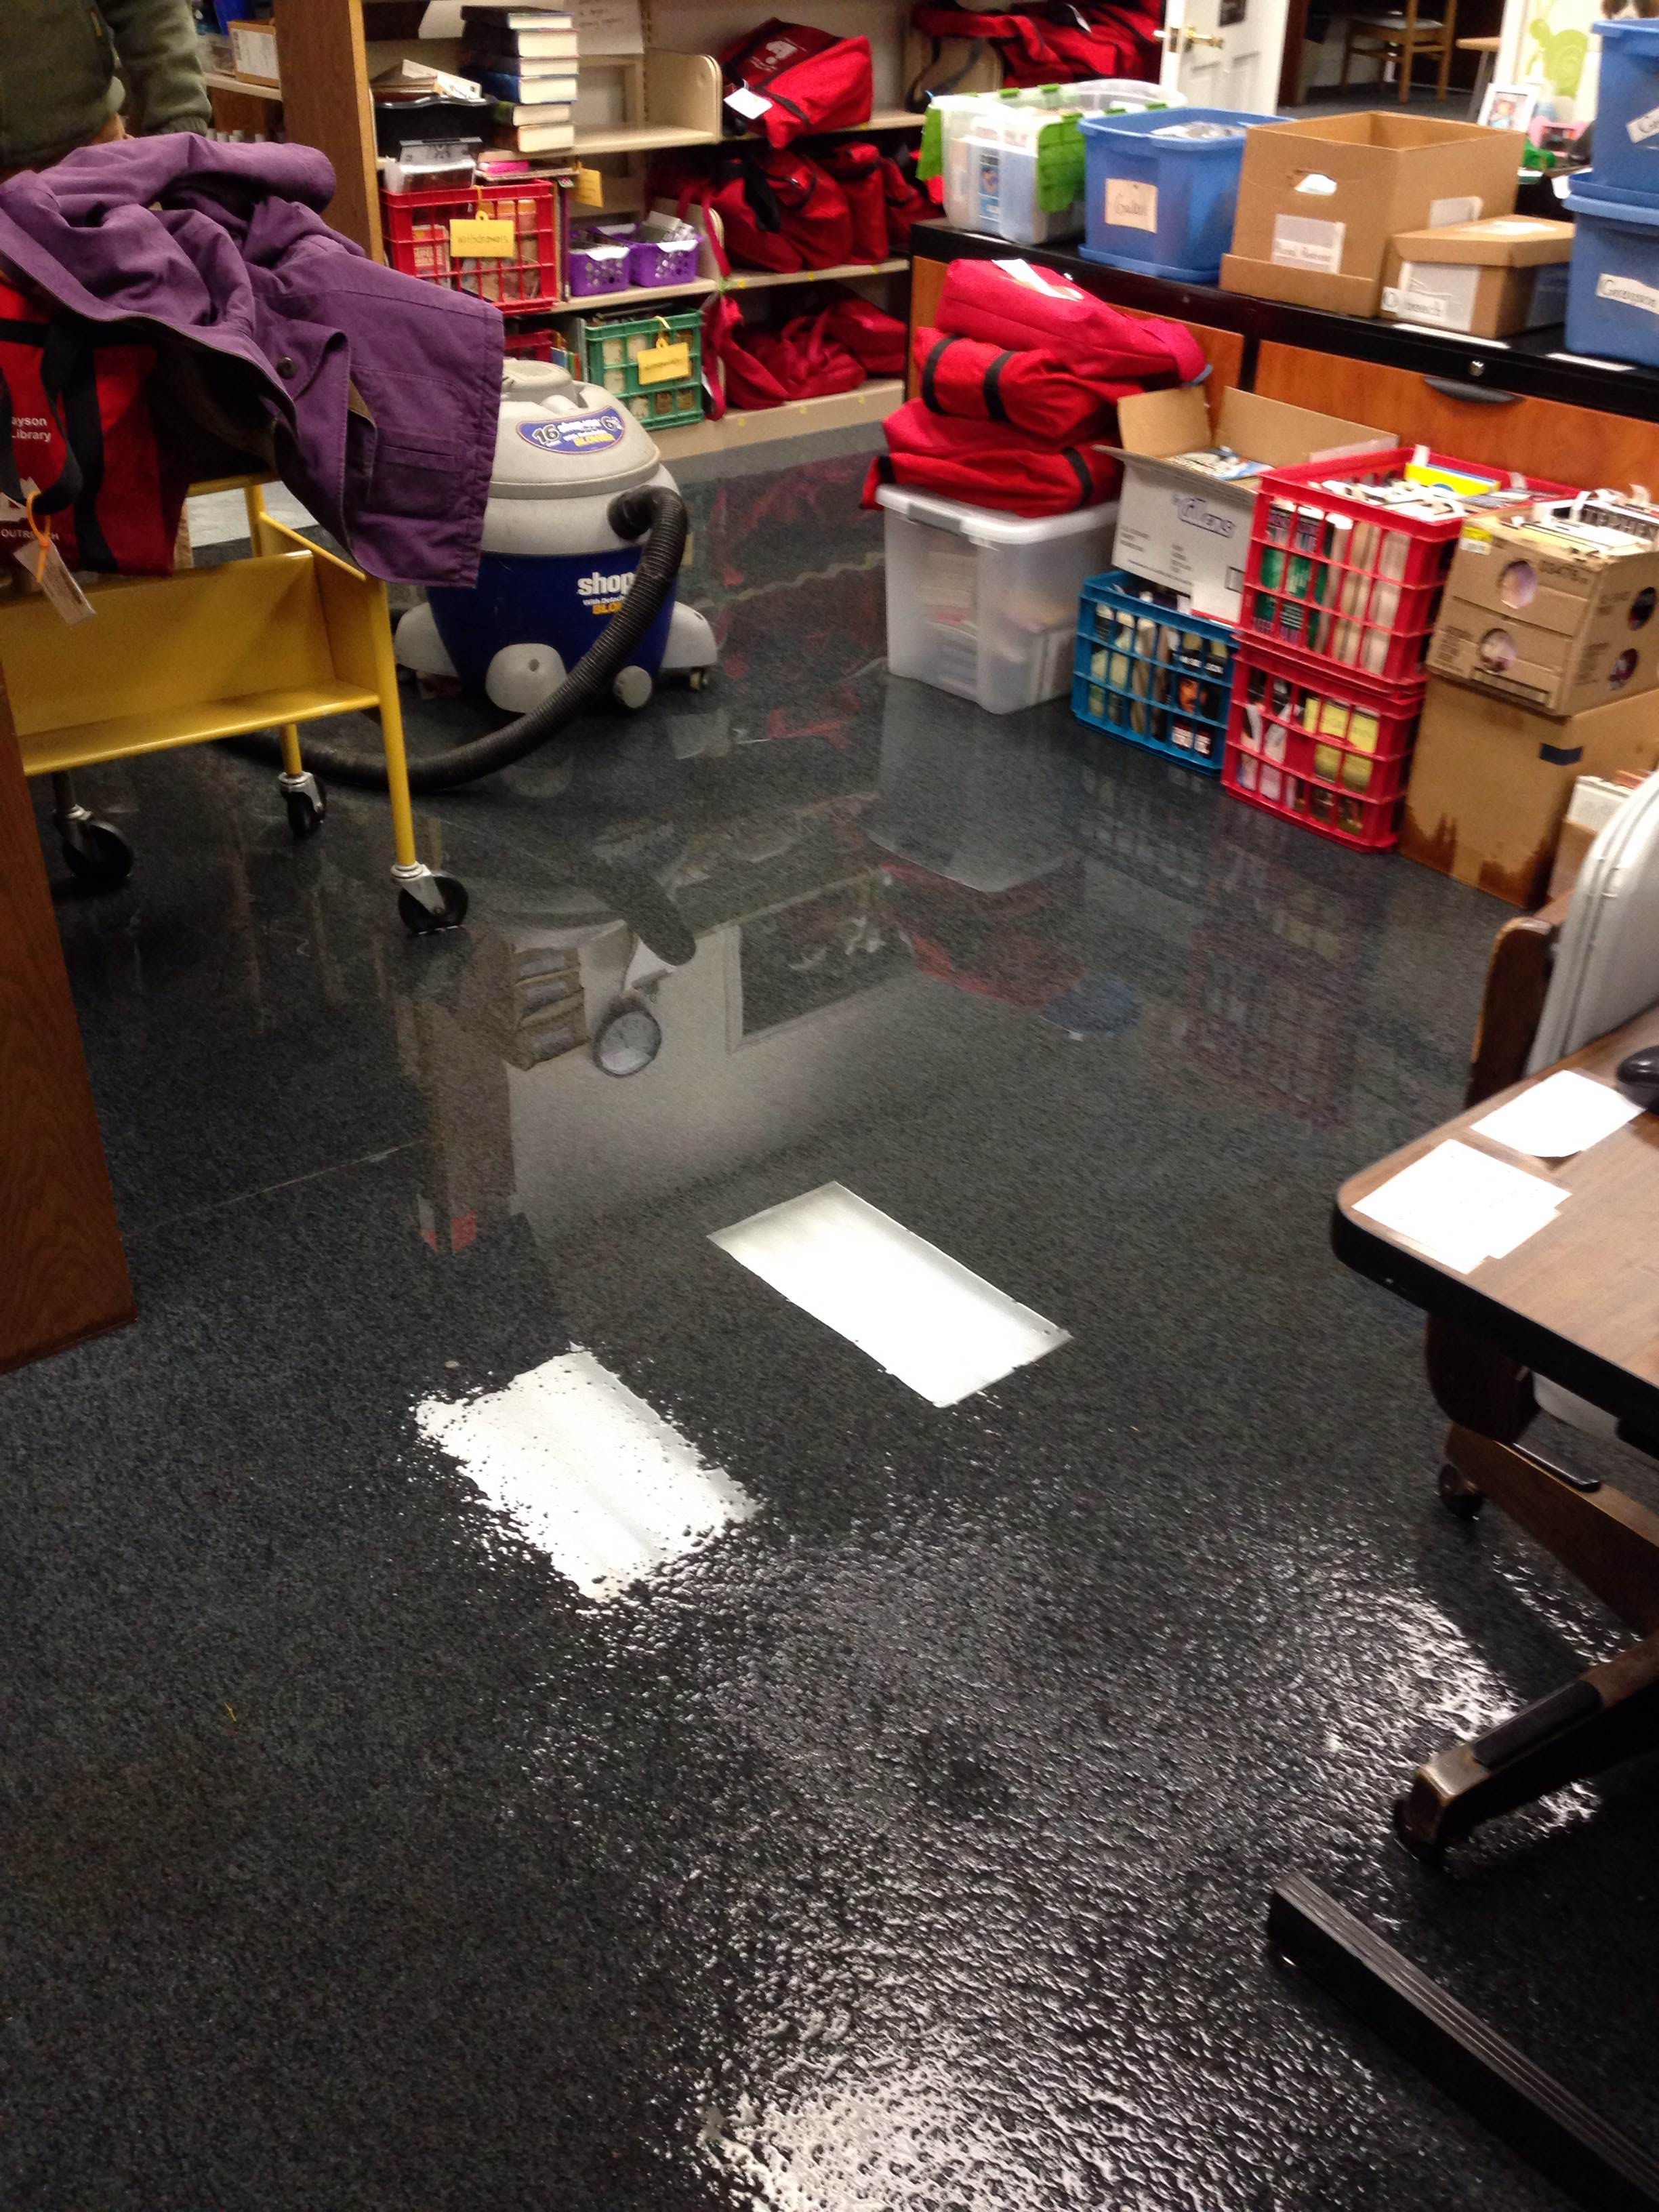 WYTHE COUNTY PUBLIC LIBRARY FLOODED DUE TO BROKEN PIPES